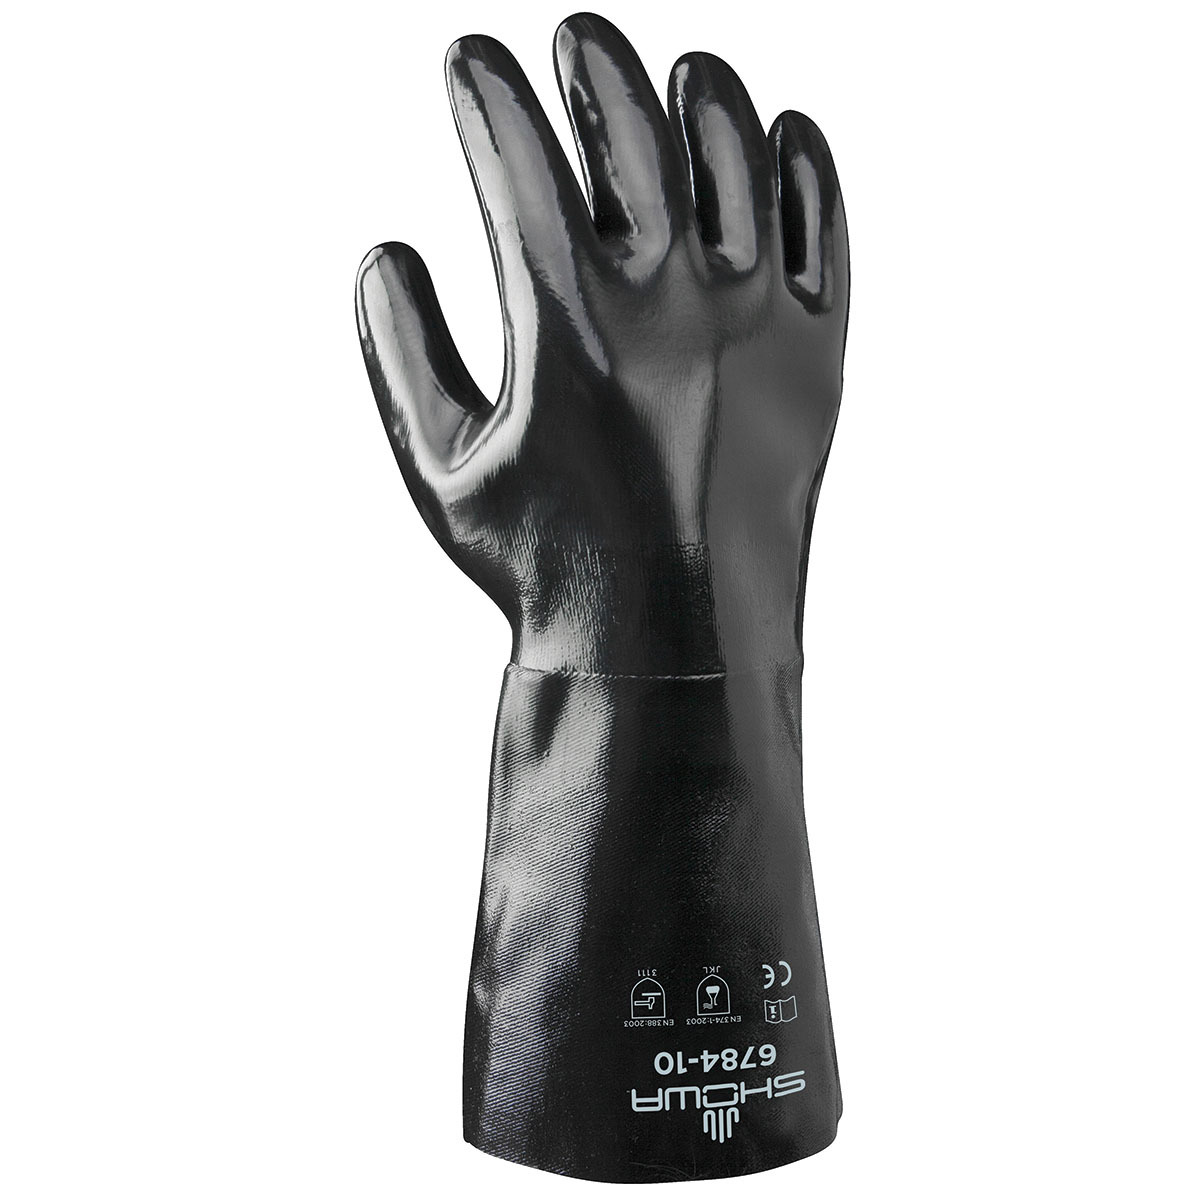 SHOWA® Size 10 Black Cotton Lined Neoprene Chemical Resistant Gloves